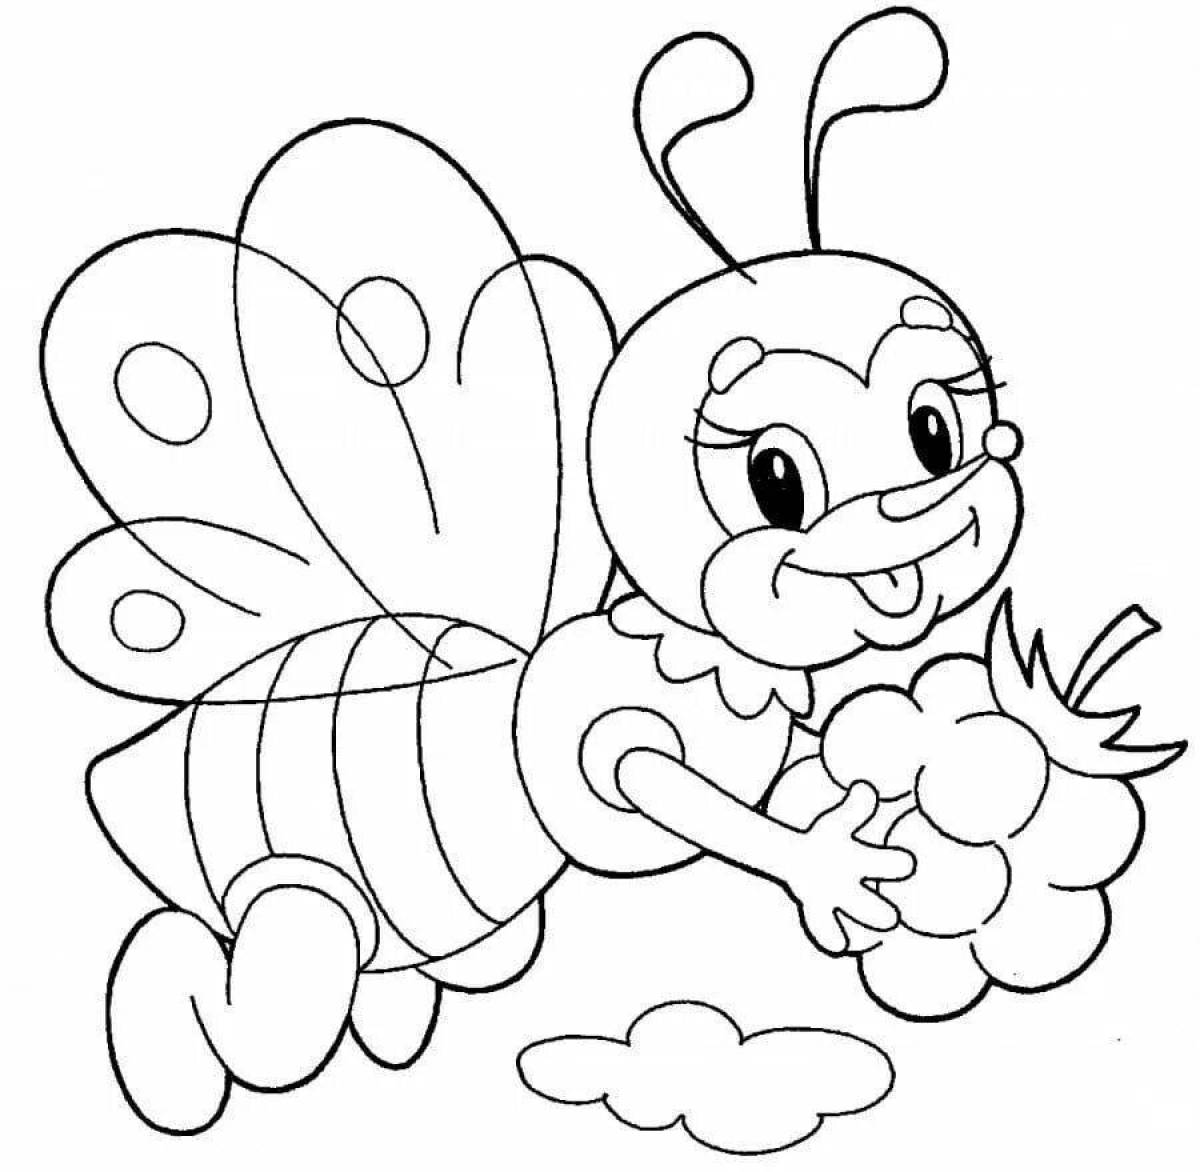 Bee for children 6 7 years old #1